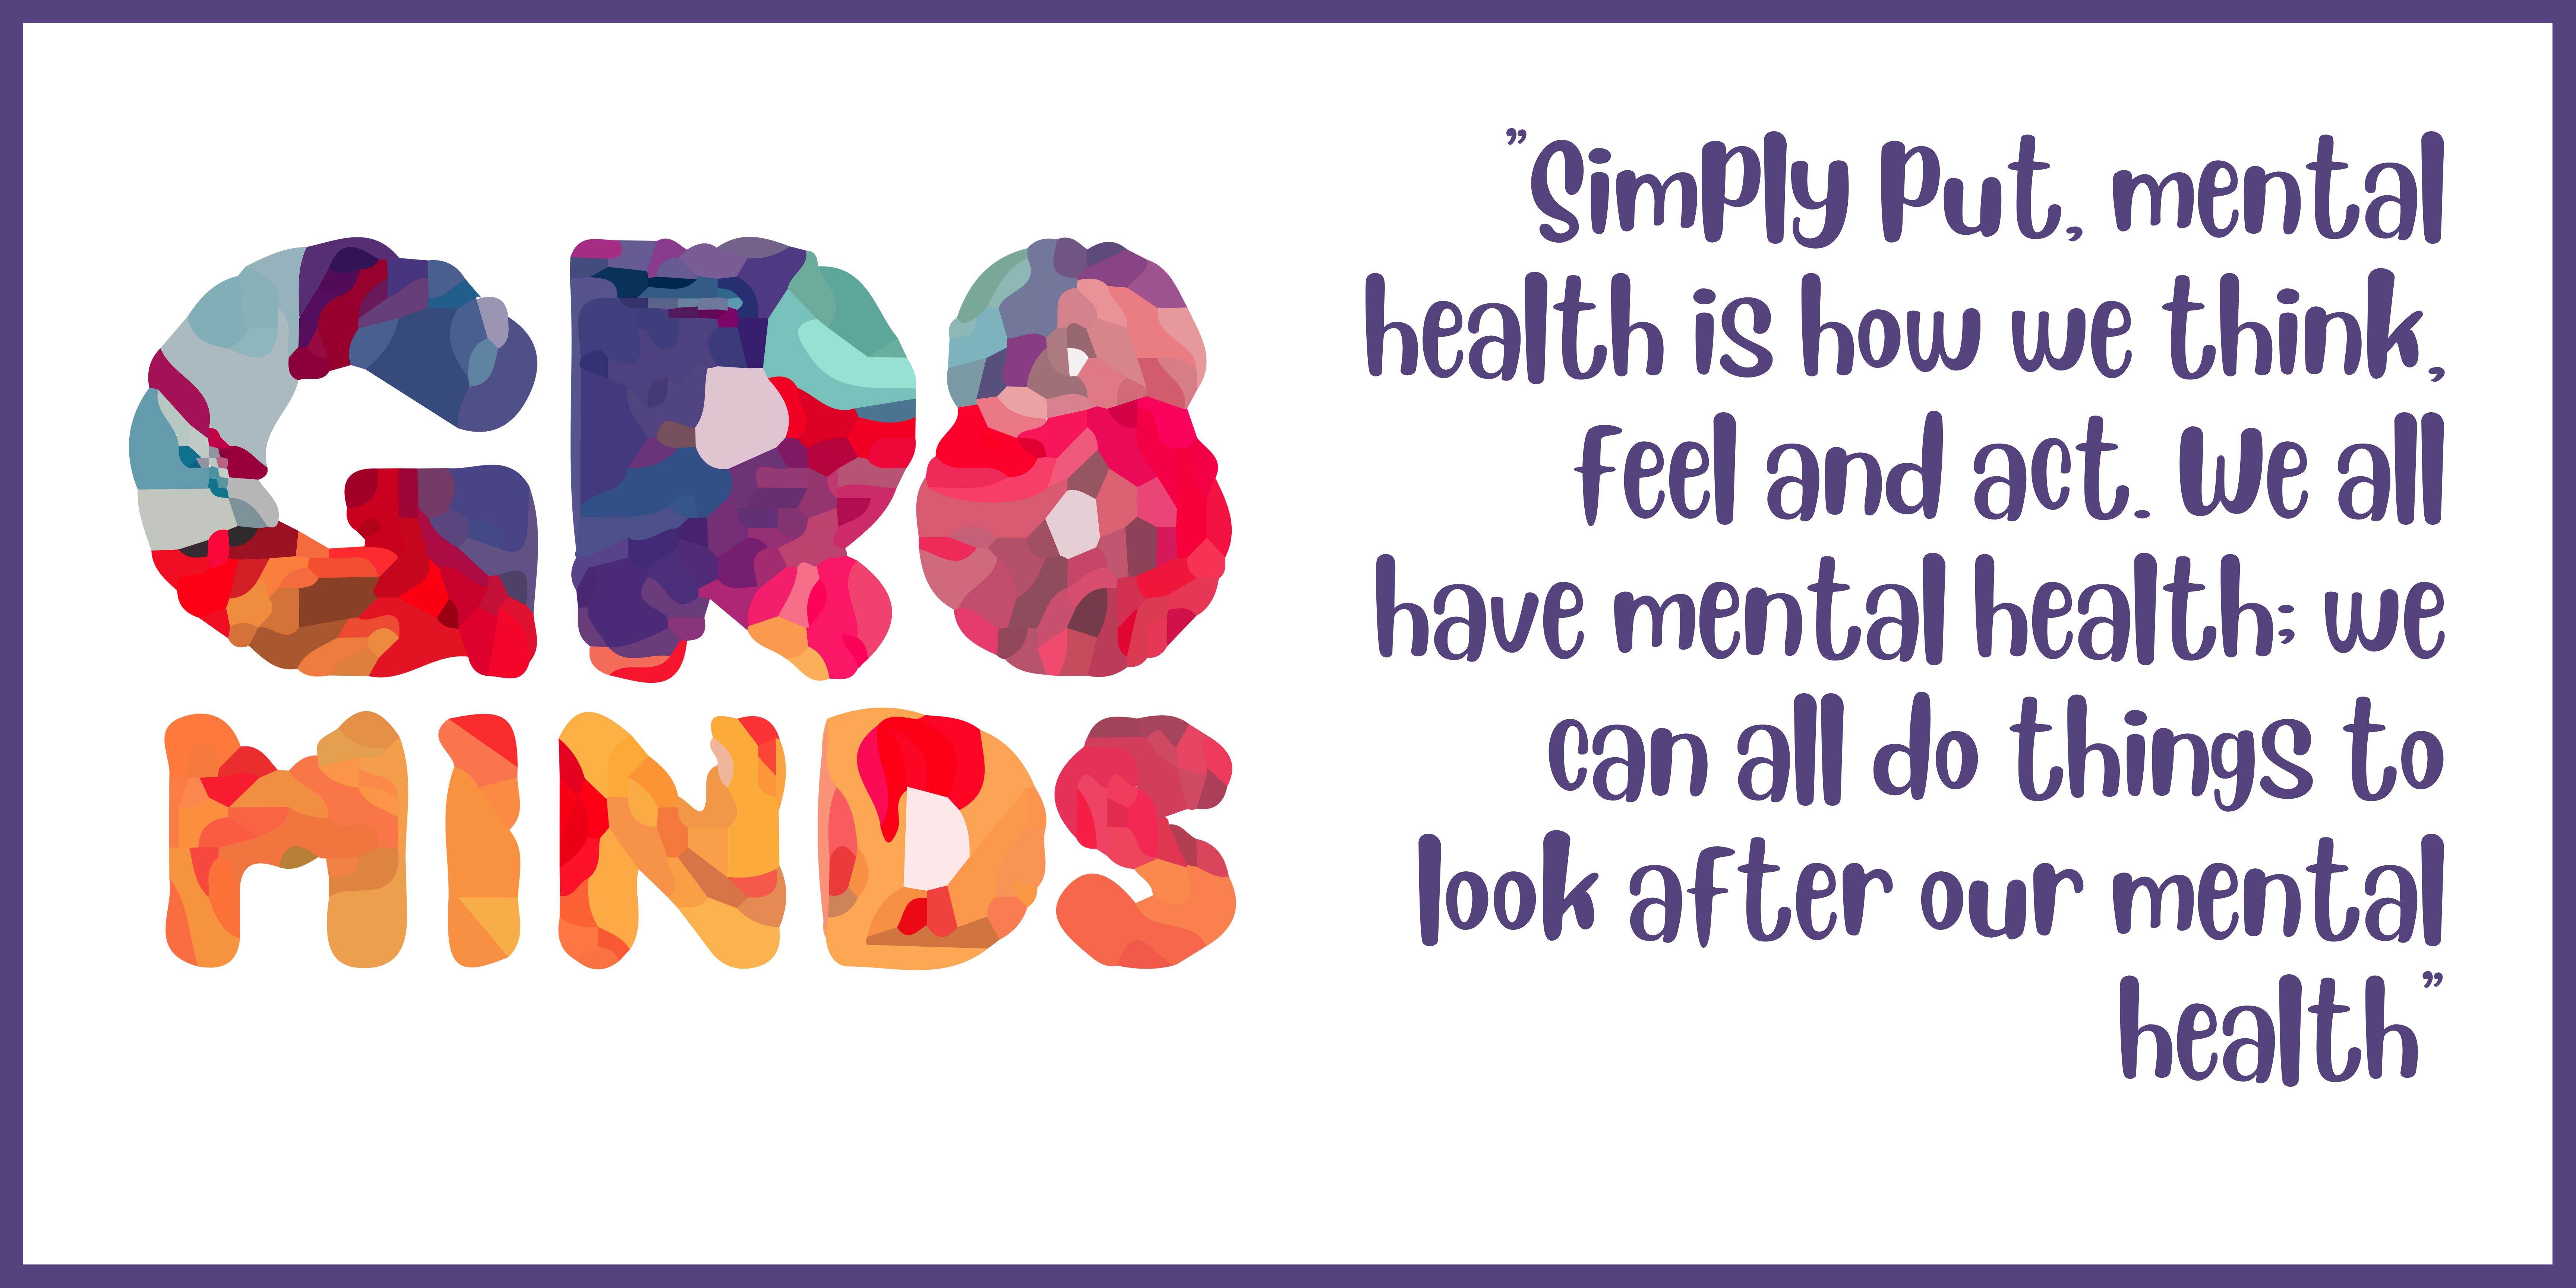 "GR8 Minds. Simply put, mental health is how we think, feel and act. We all have mental health: we can all do things to look after our mental health."